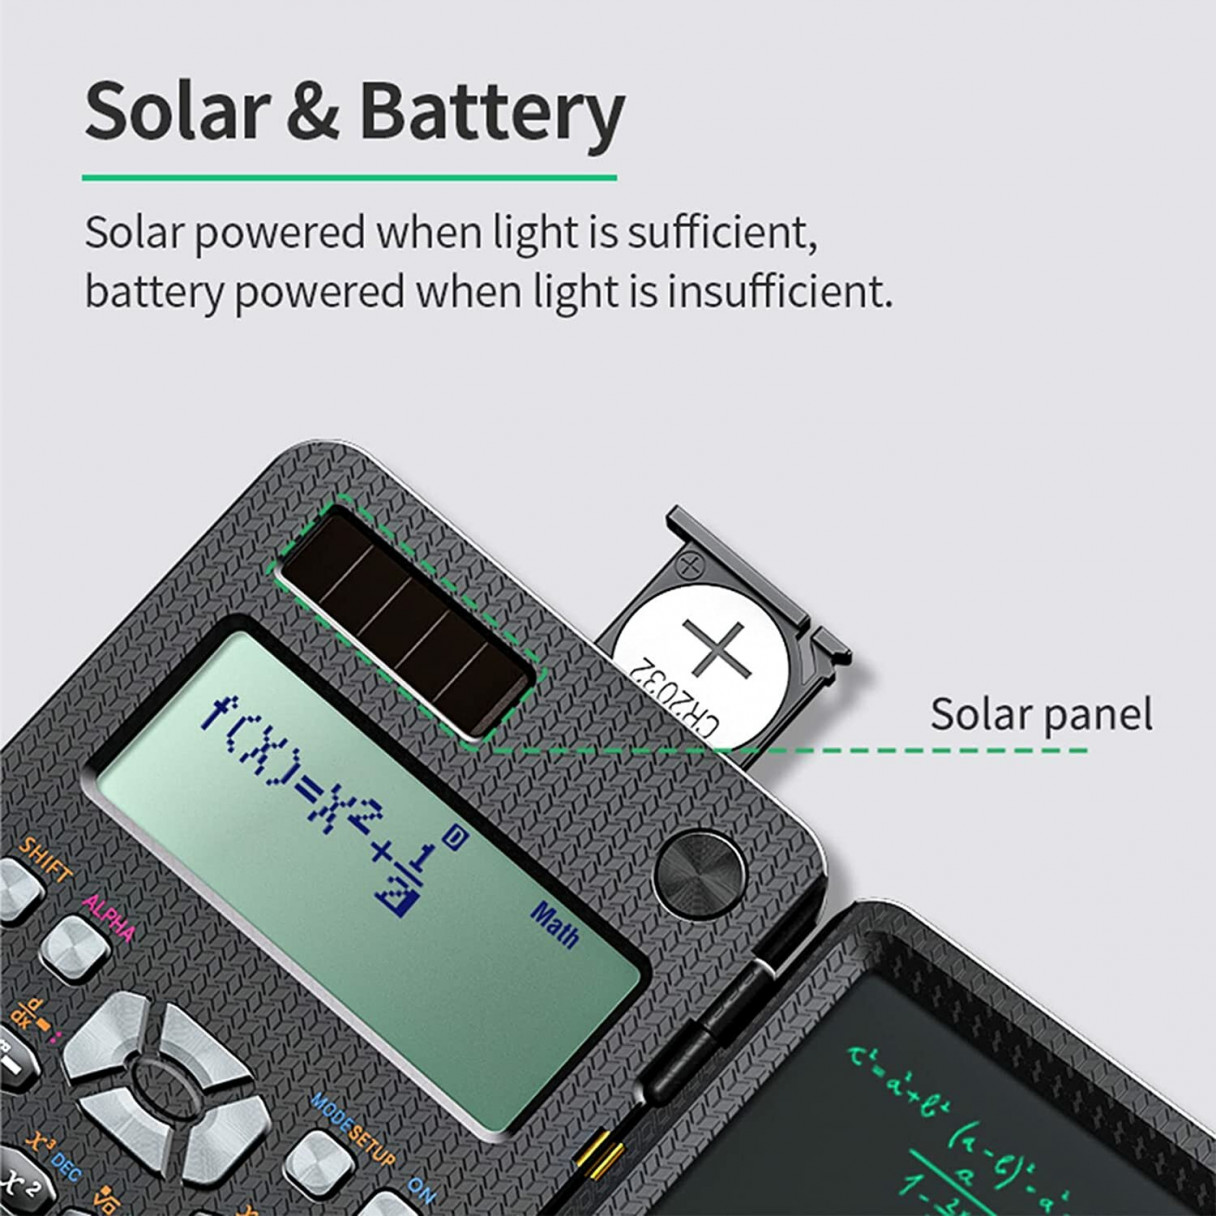 NEWYES 991ES 6.5 Inches Scientific Calculator with LCD Writing Tablet and 417 Functions Solar Energy Science Calculators Notepad Professional Foldable Calculators for School Students Office Assistant